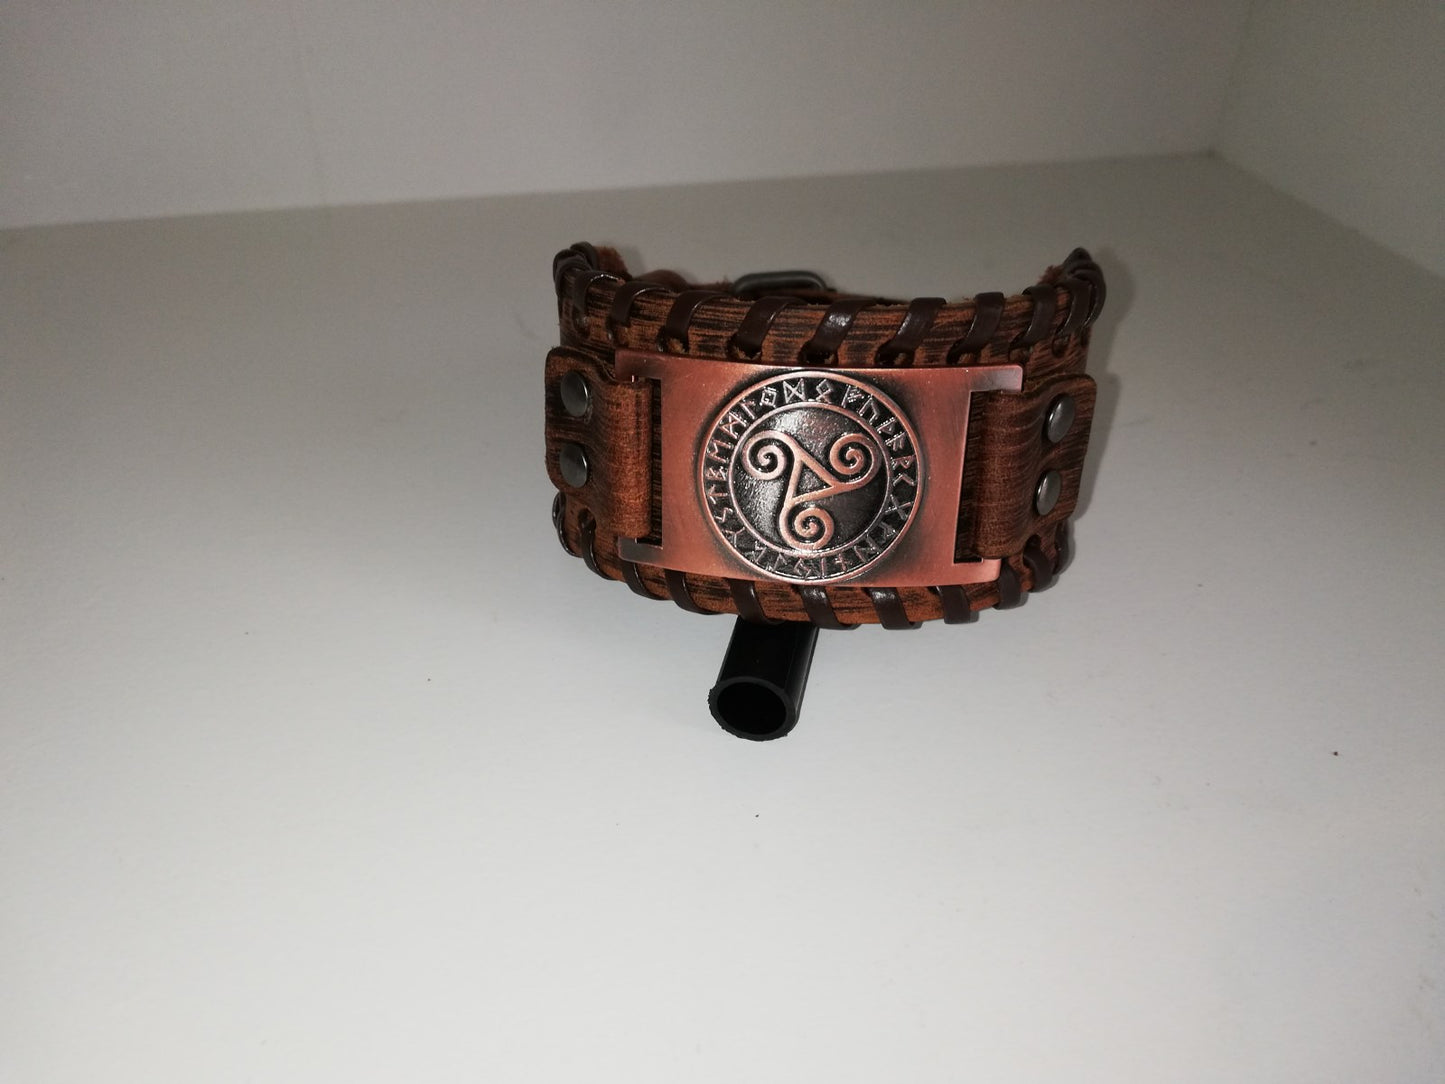 Brown leather bracelet with bronze colored BDSM logo